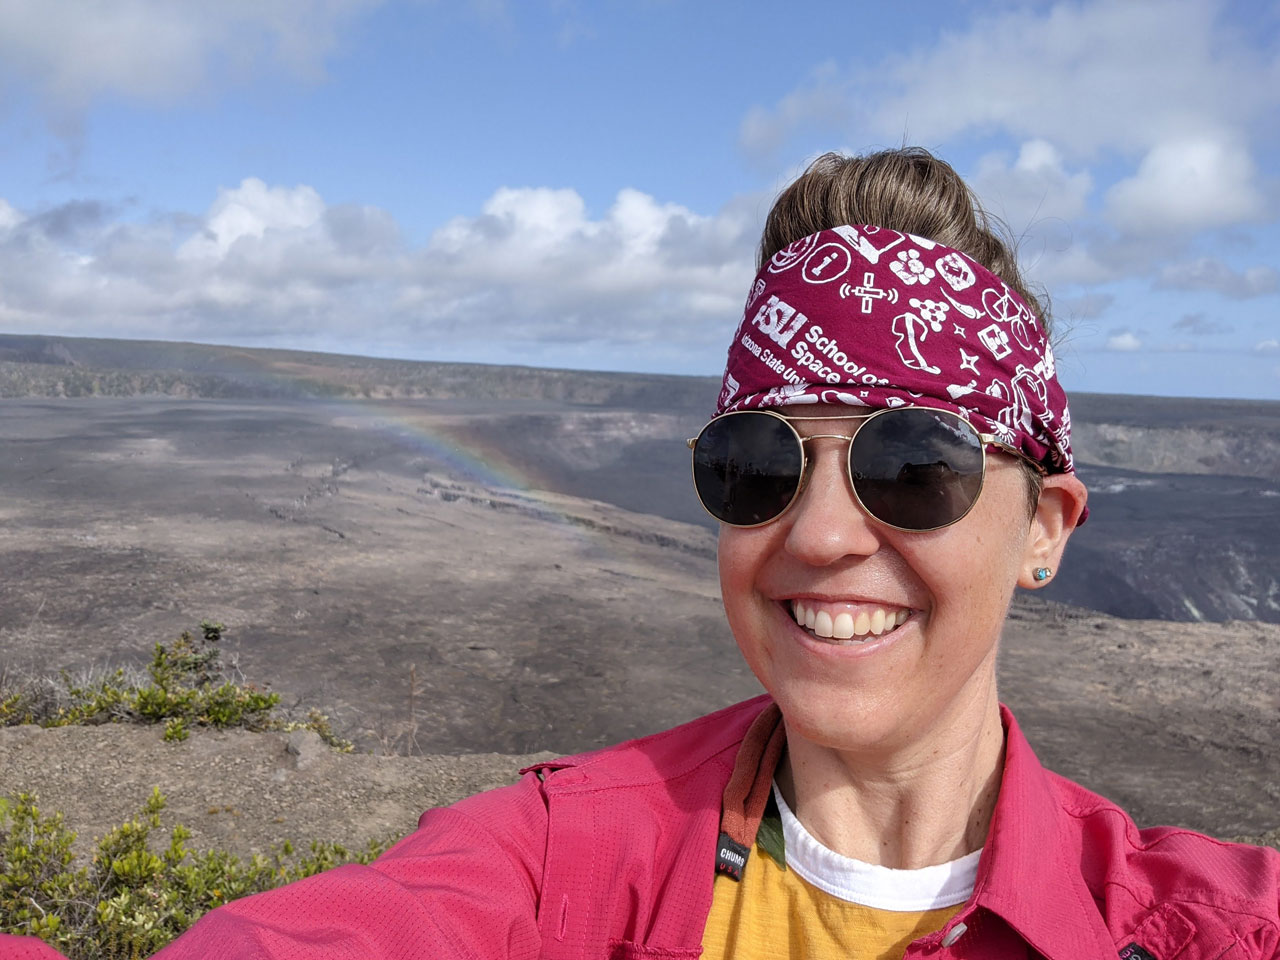 Melanie is taking a selfie in front of a lava field. She's wearing dark aviator glasses and a red jacket.